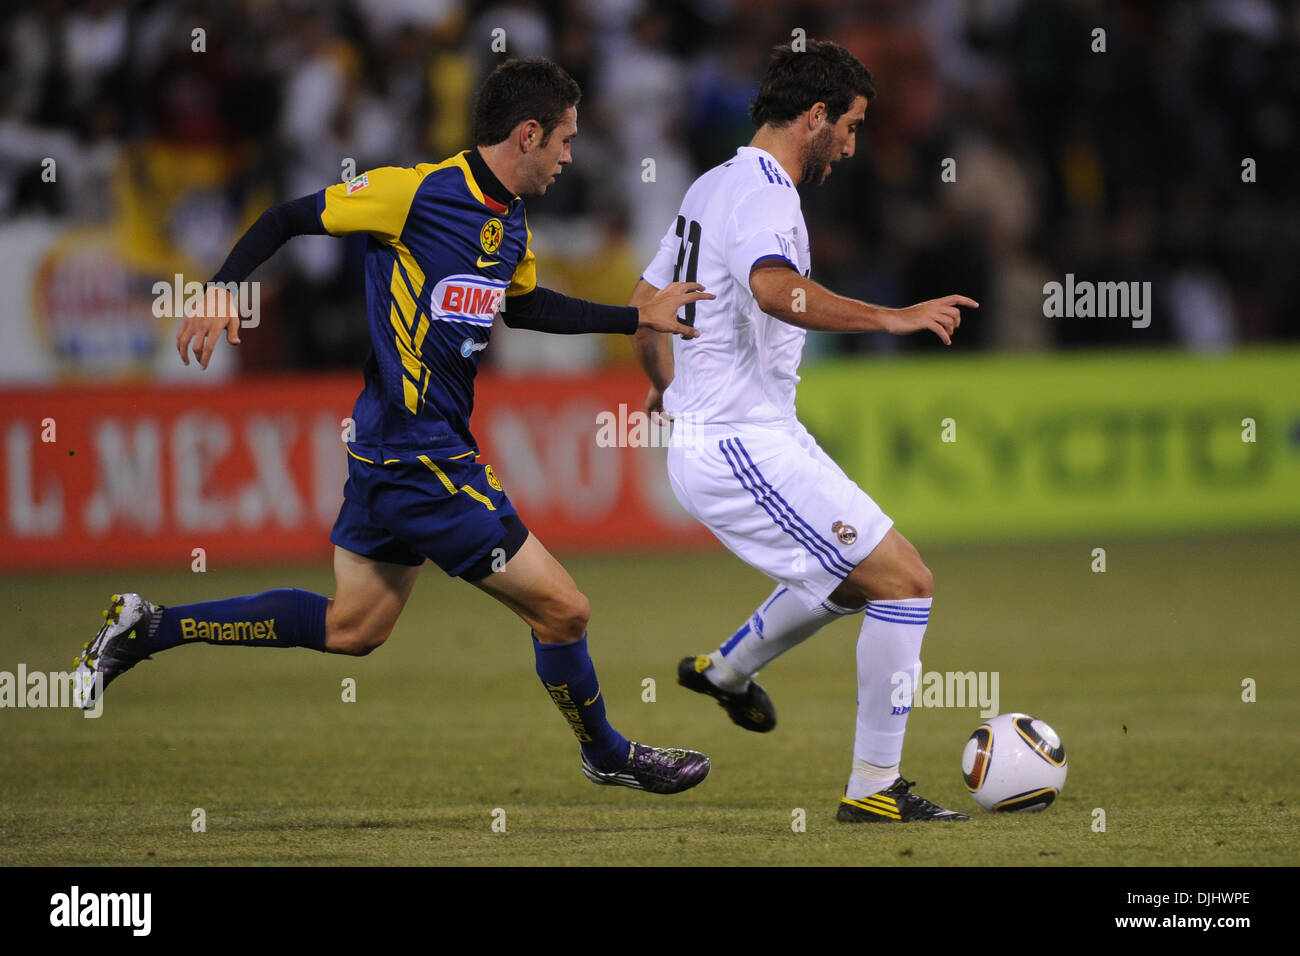 Aug. 04, 2010 - San Francisco, California, United States of America - August 4, 2010: Club America M Miguel Layun (19) shadows Real Madrid F Gonzalo Higuain (20) during the friendly between Real Madrid and Club America at Candlestick Park in San Francisco, CA.  Real Madrid took the contest 3-2..Mandatory Credit: Matt Cohen / Southcreek Global (Credit Image: © Southcreek Global/ZUMA Stock Photo